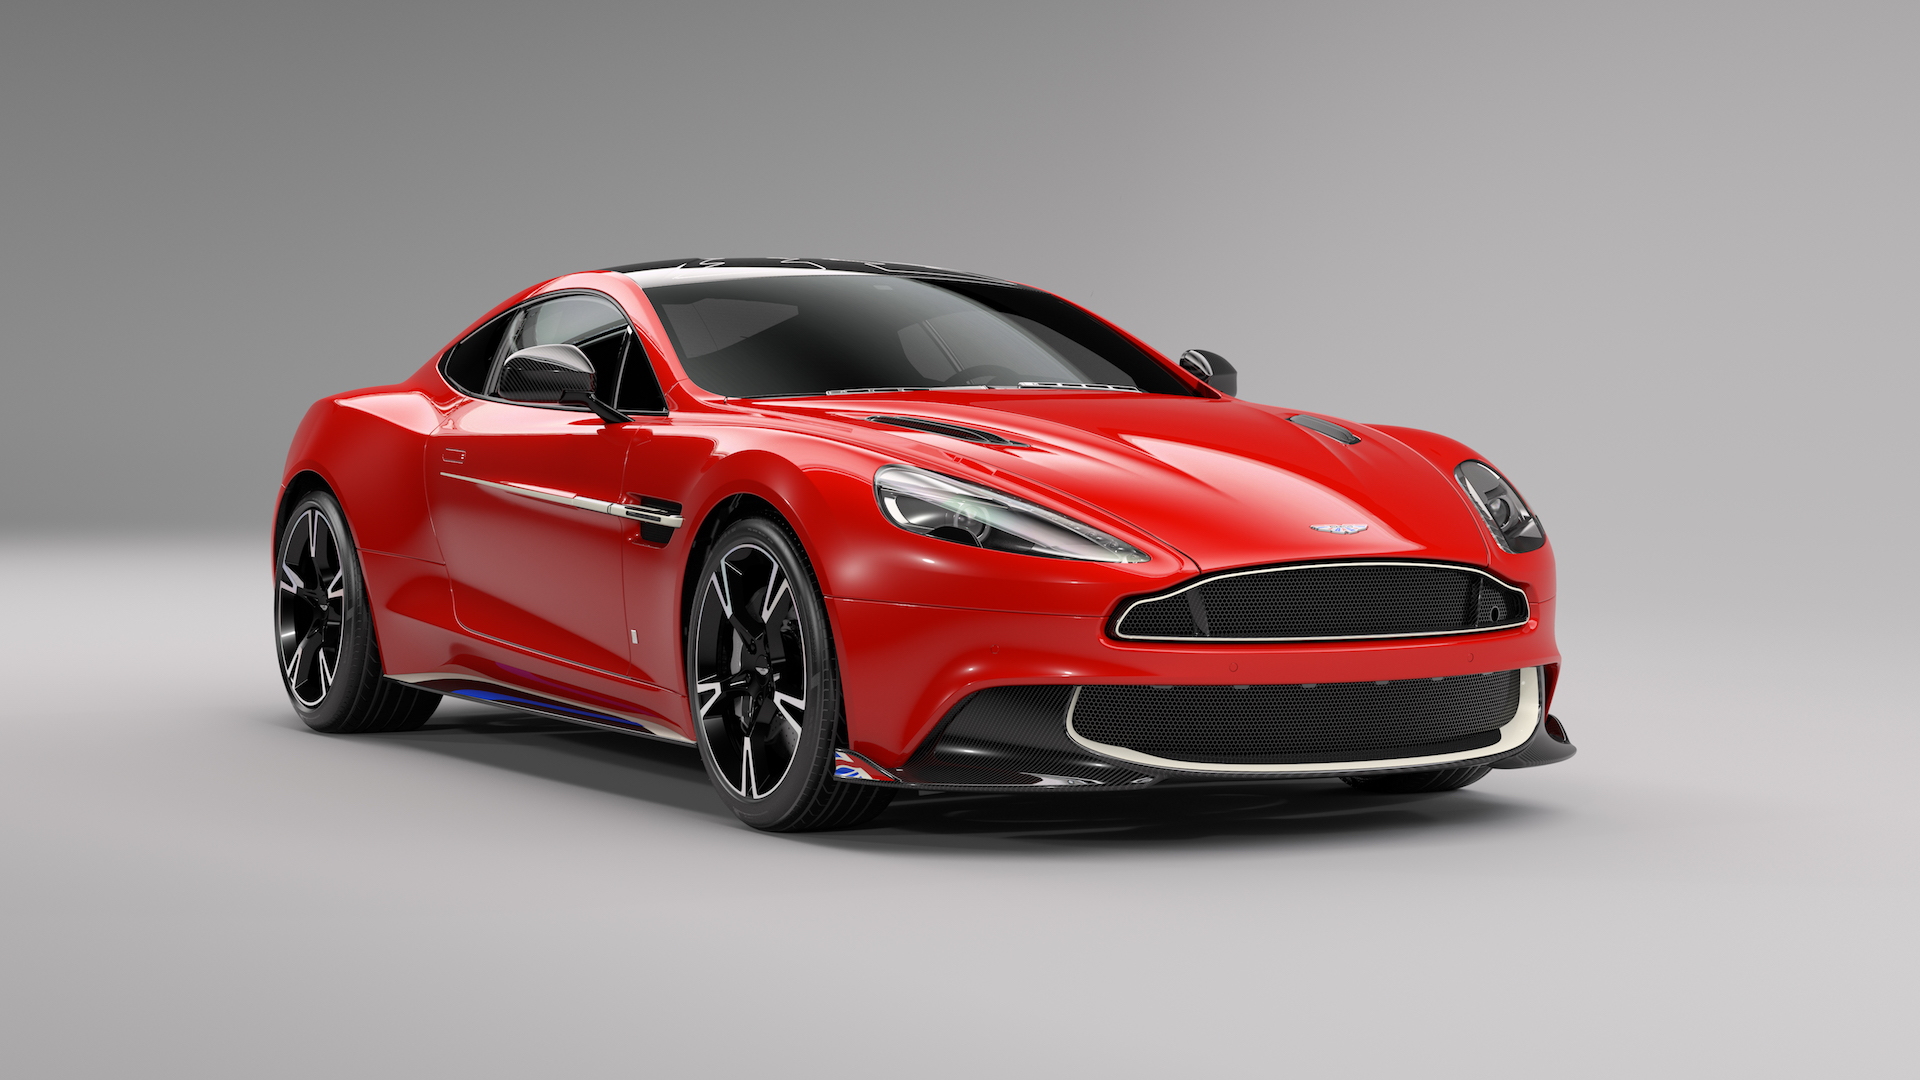 Q by Aston Martin: Vanquish S Red Arrows Edition